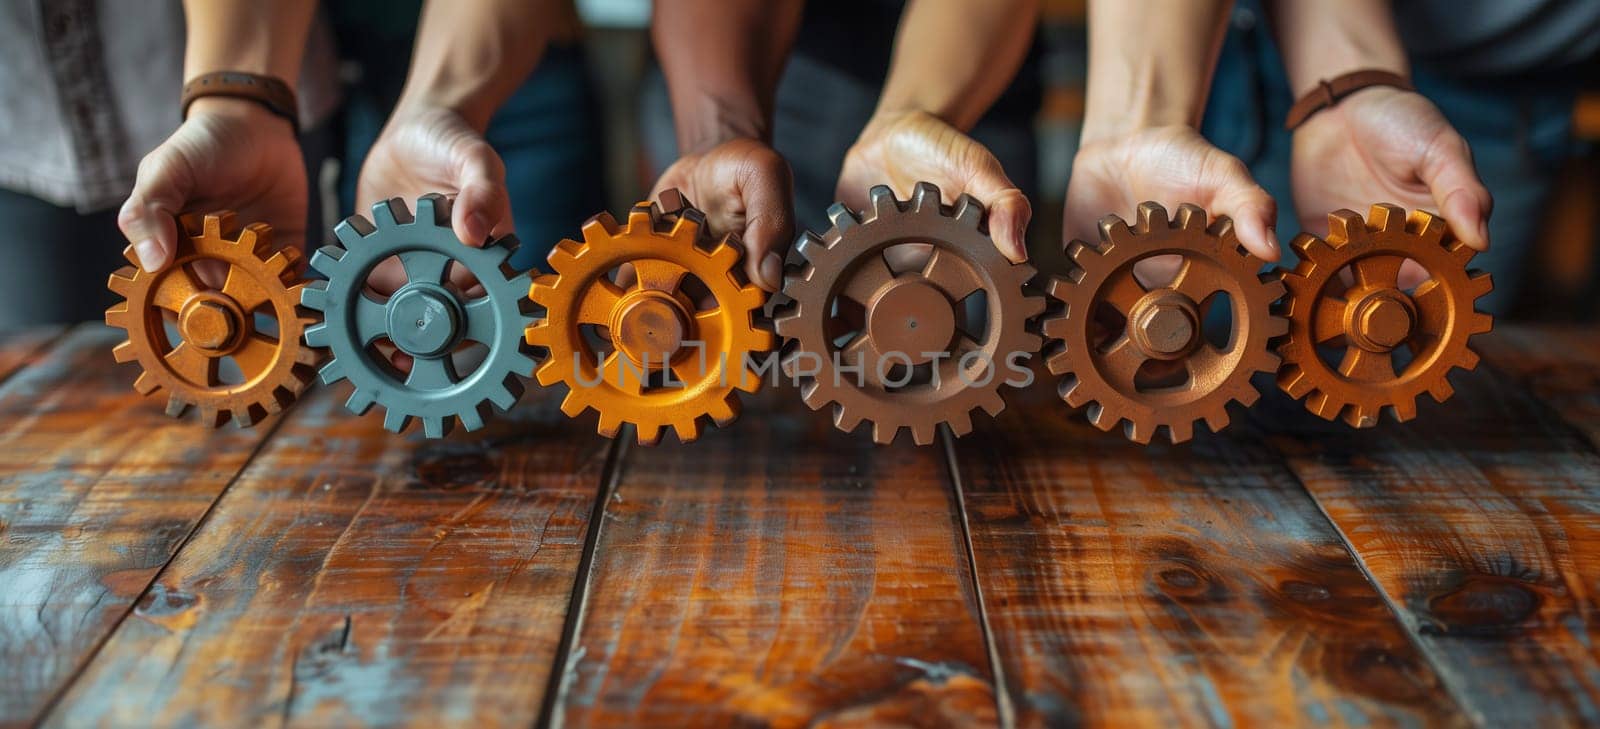 A group of people are gathered around a wooden table, holding gears used for automotive wheels and rims. The table is also decorated with bicycle parts and auto parts